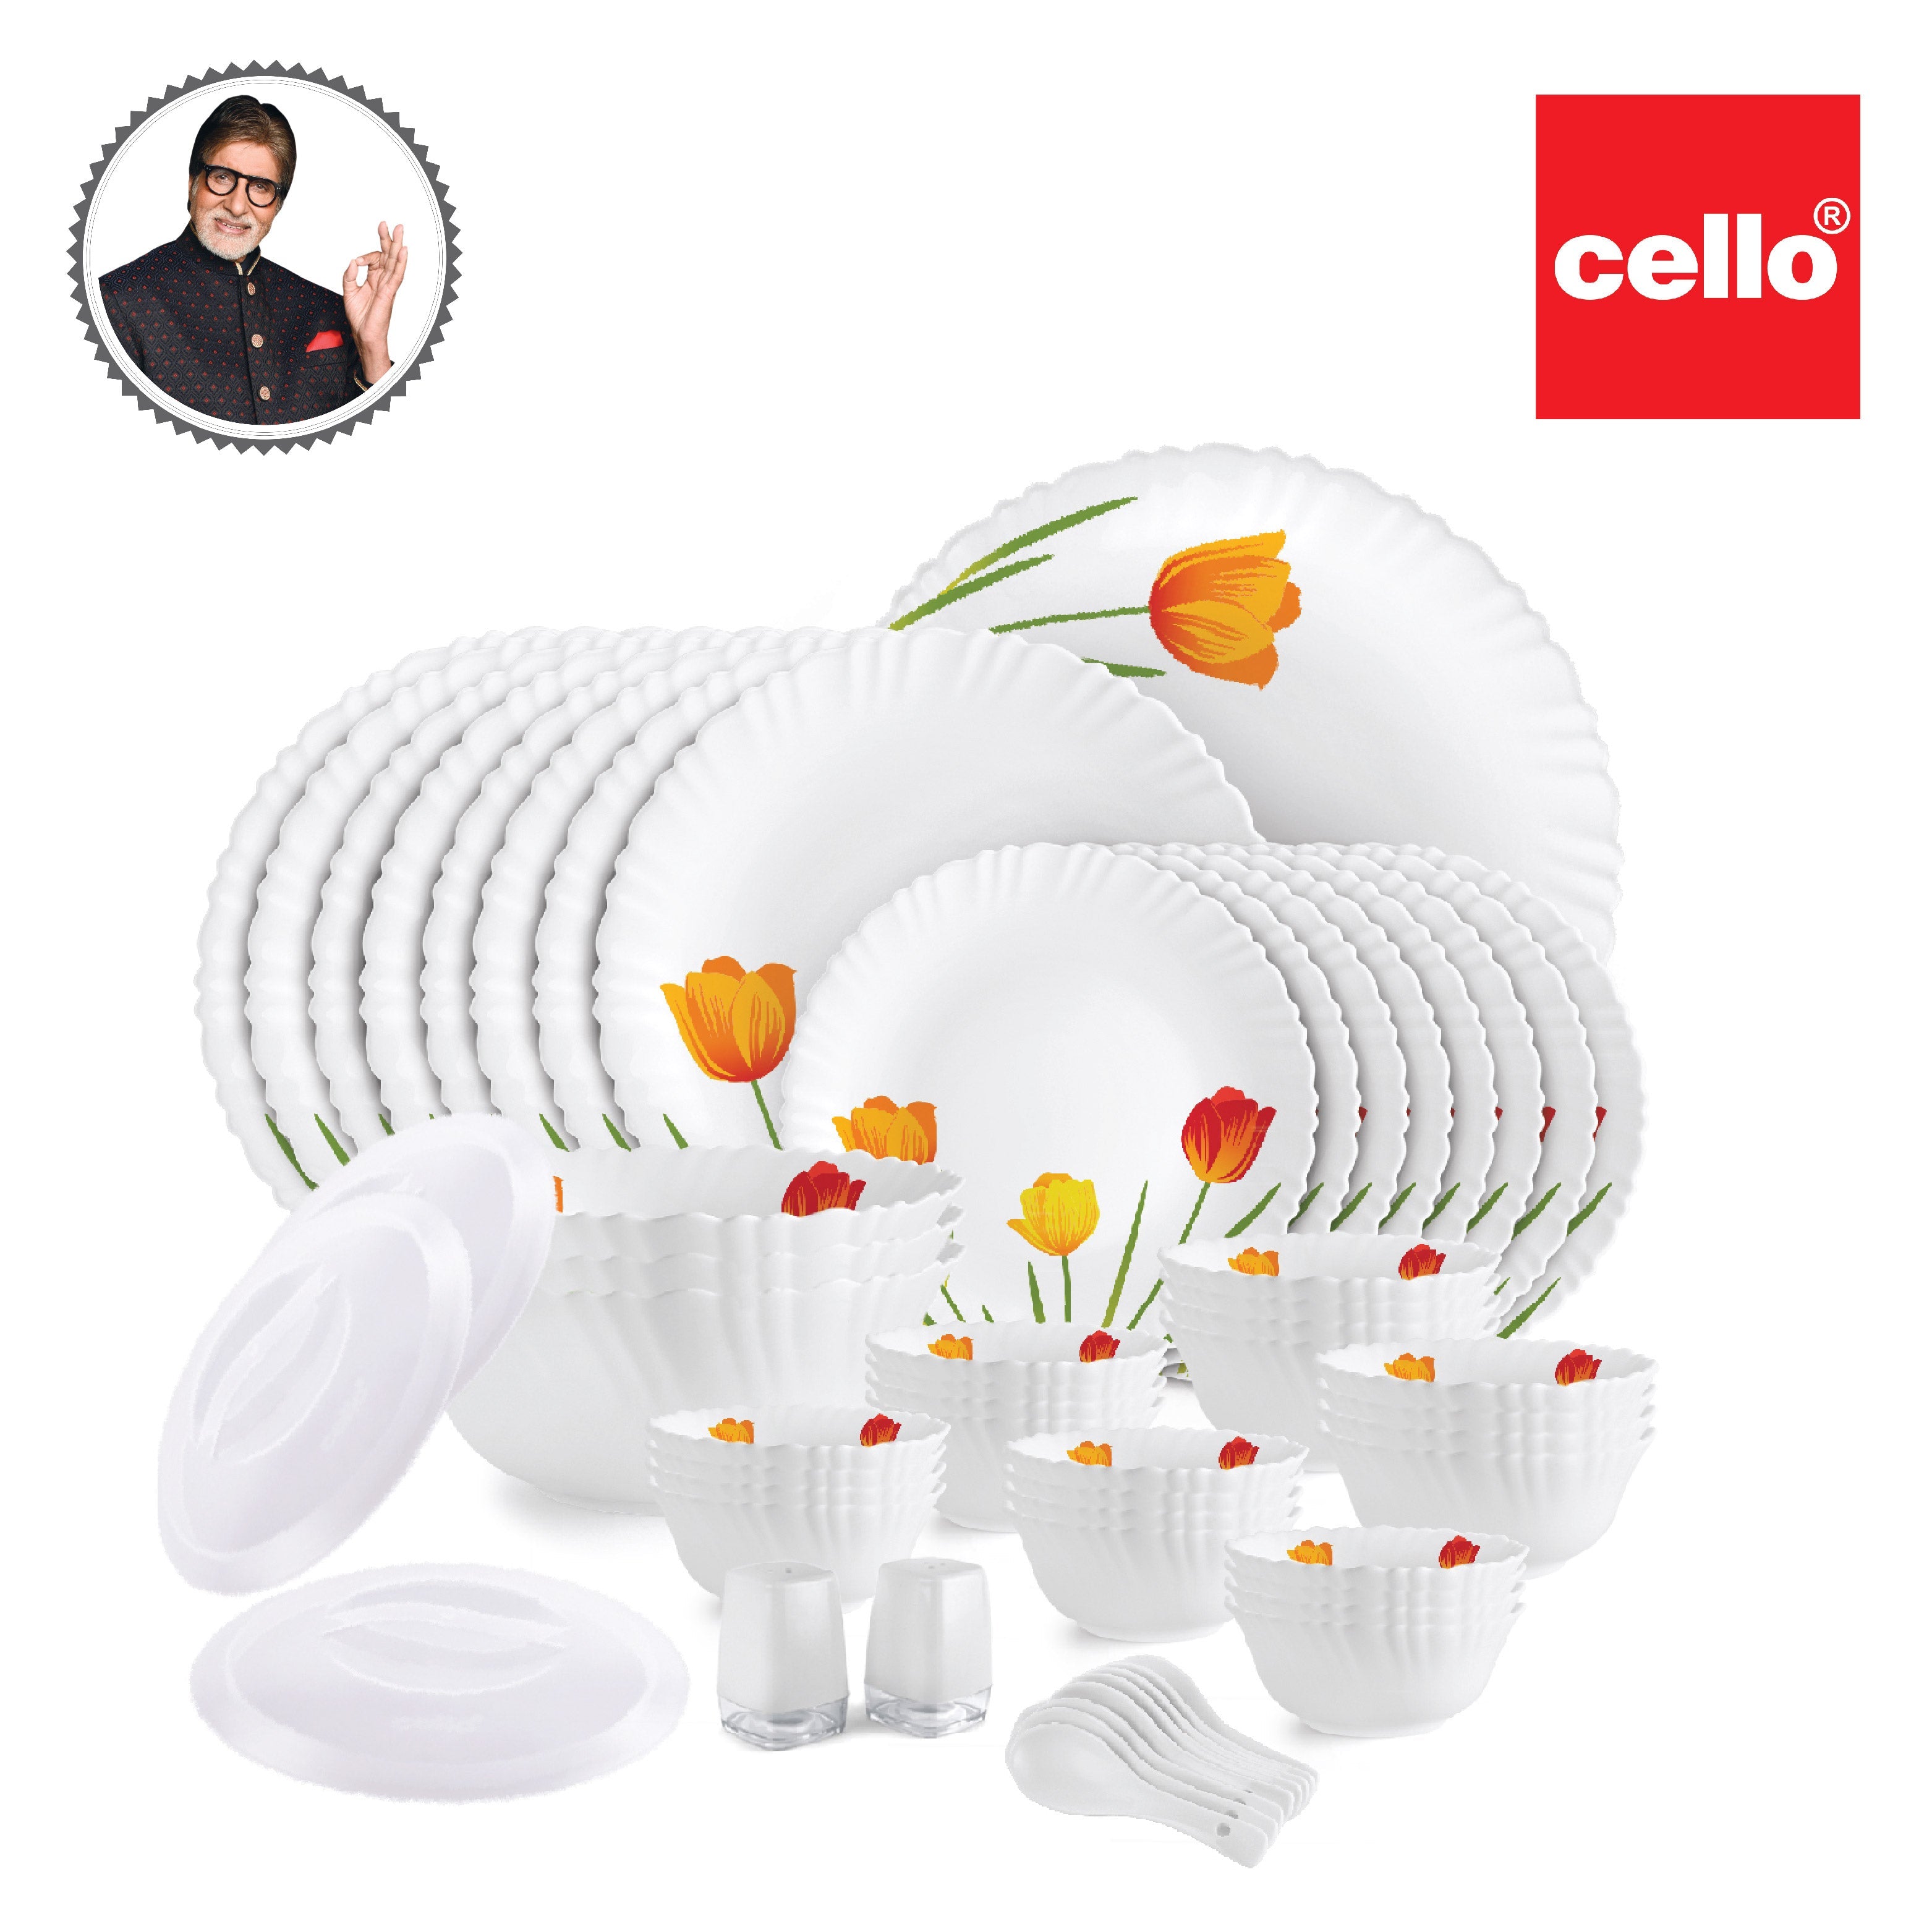 Vibrant 57-piece opalware dinner set, adorned with floral motifs. Includes plates, bowls, and serveware for elegant dining